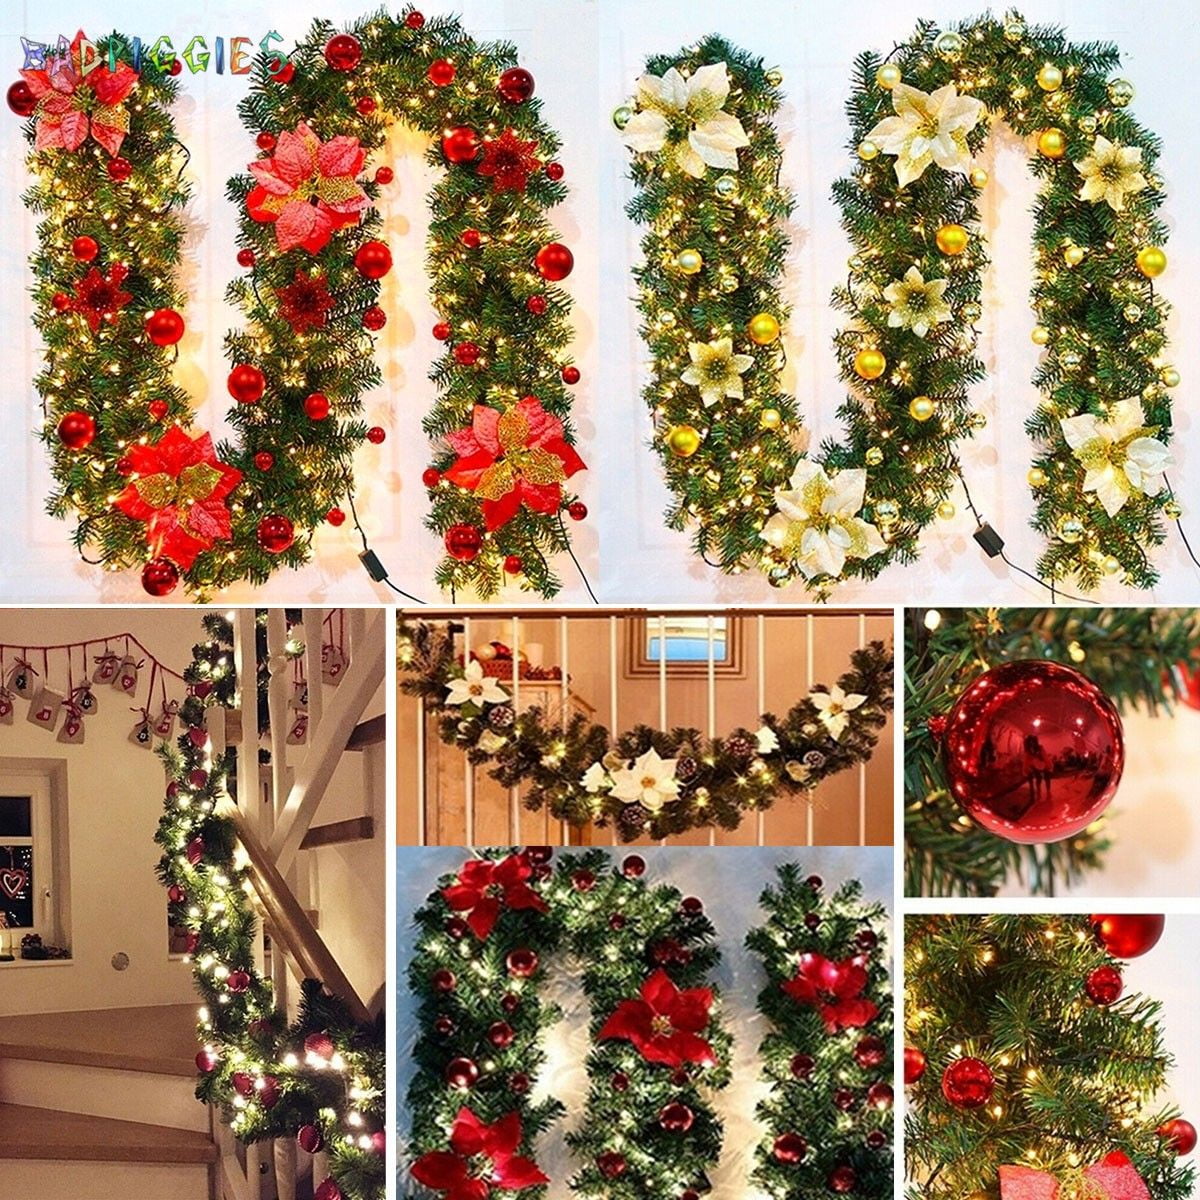 Details about   8 Choices 270cm Christmas Garlands Lights Pre-Lit Decorated Wreath w/Pine Cones 